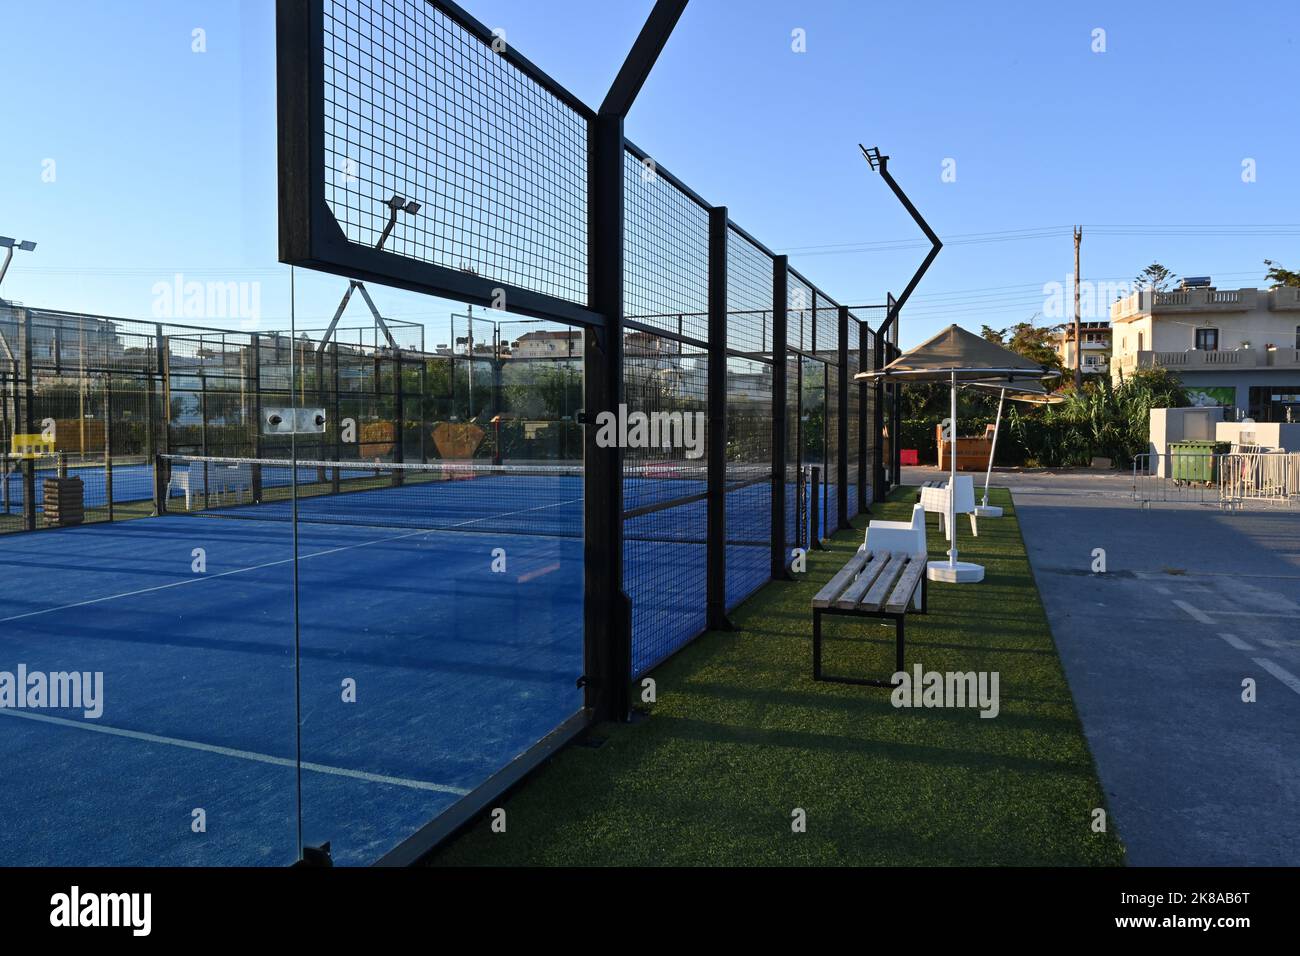 View on enclosed court for padel with construction created by mesh and the glass back walls. Stock Photo